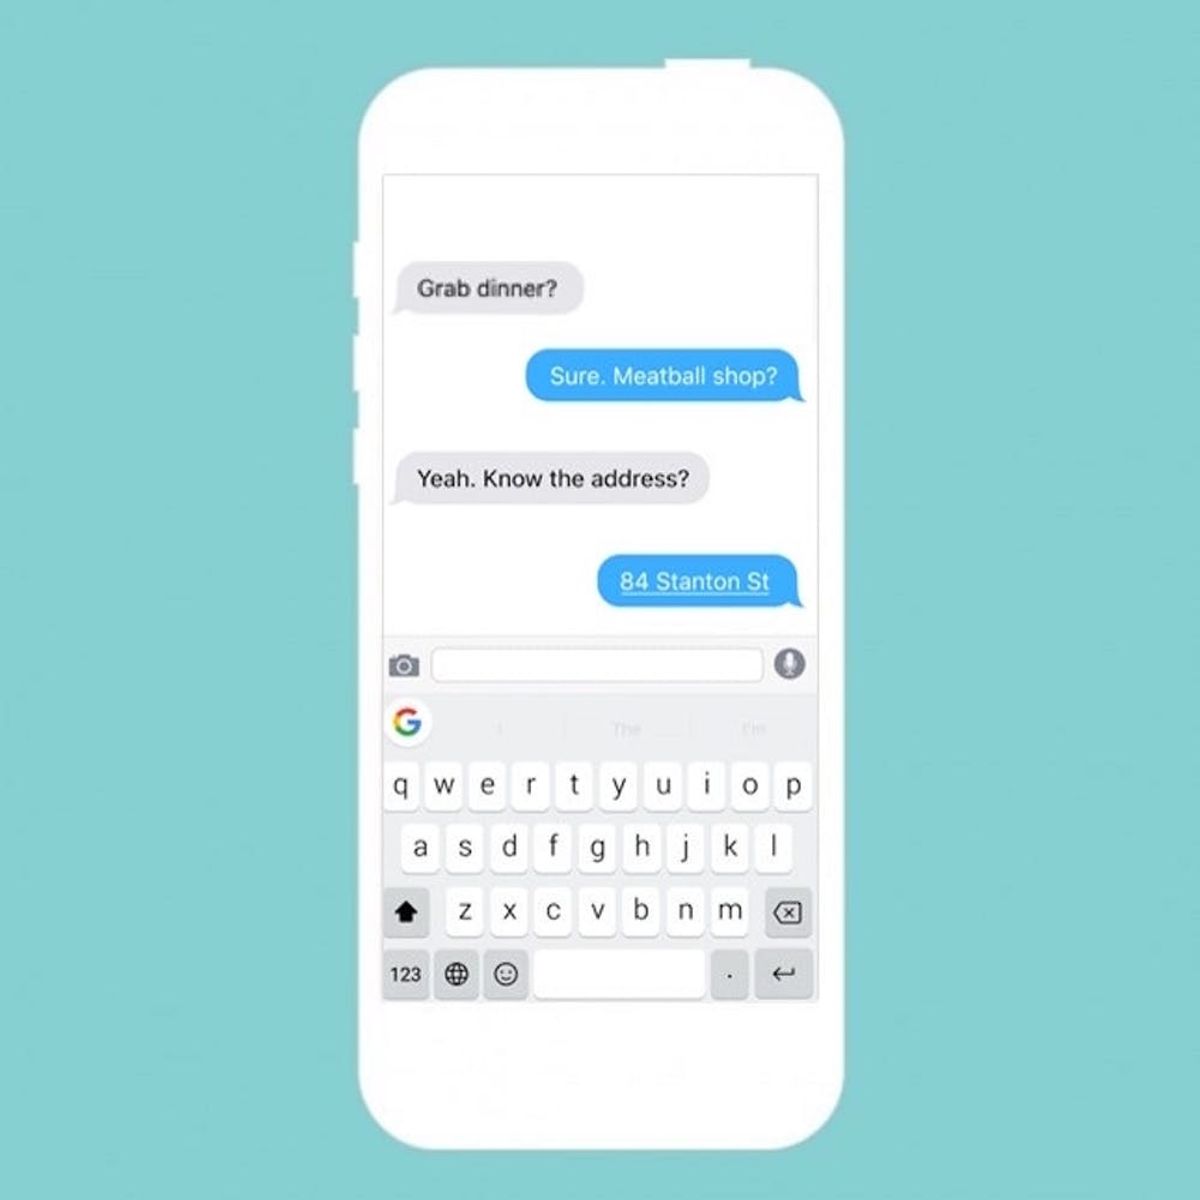 Google’s New App Gboard Puts Google (and Emoji) Search Directly Onto Your iPhone Keyboard